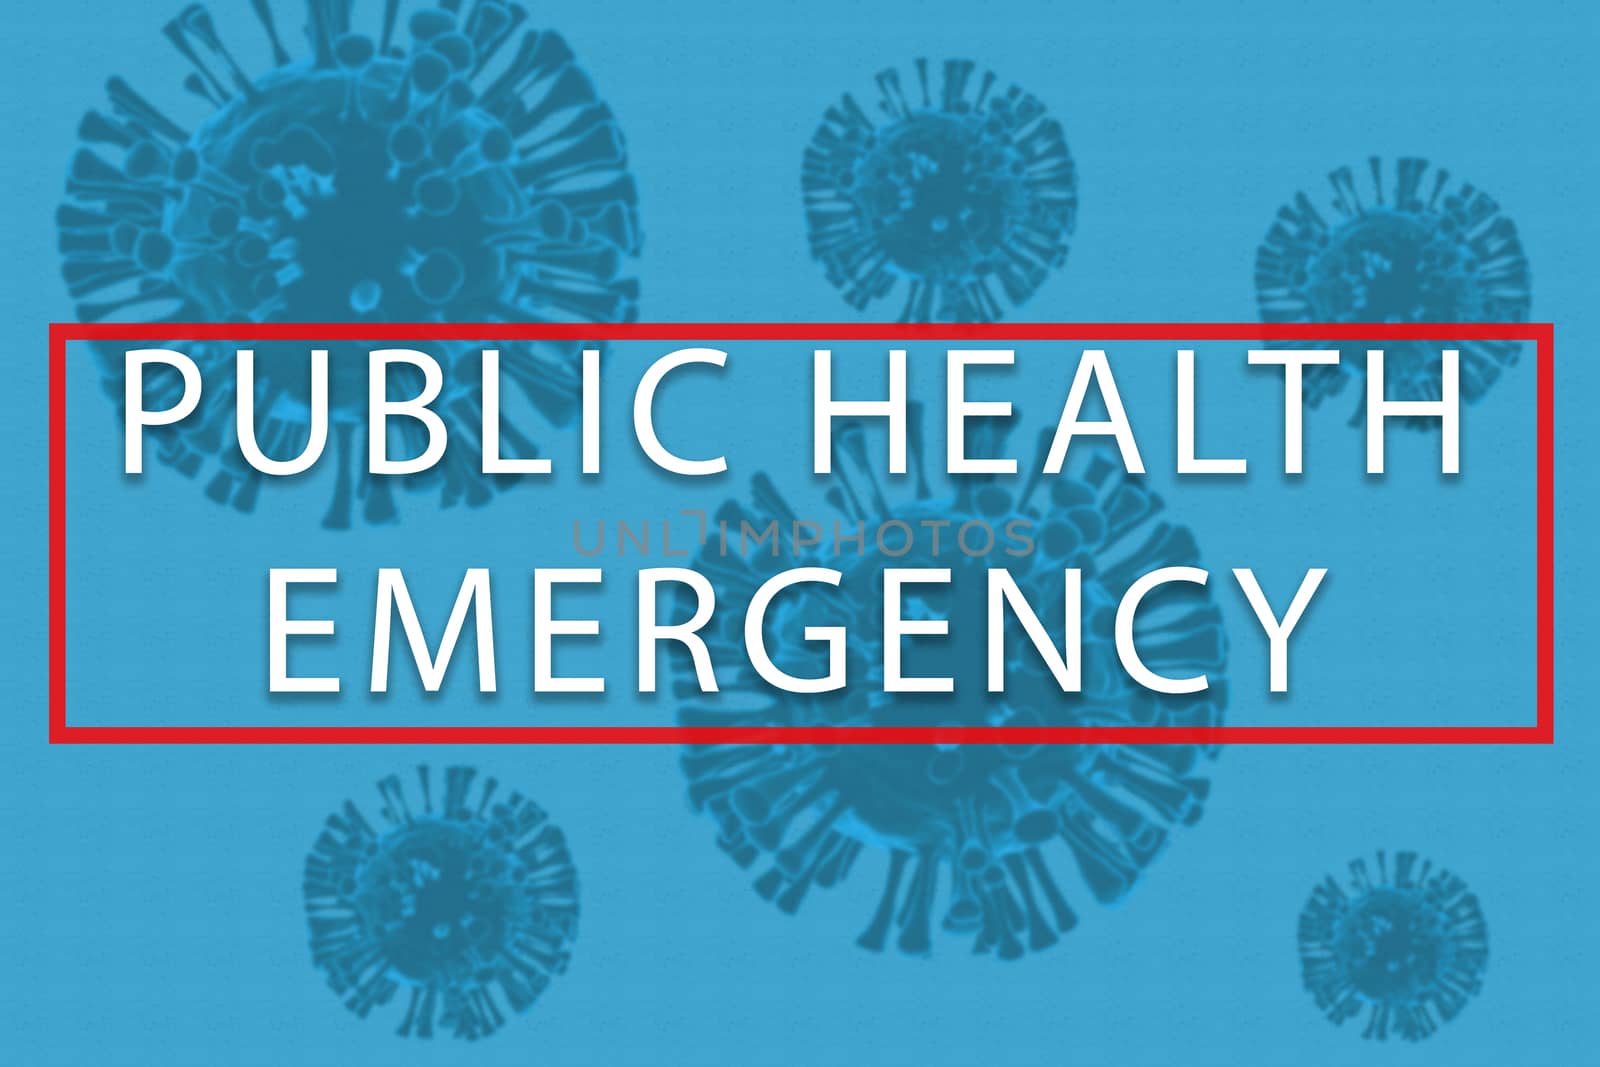 Concept of public health emergency due to coronavirus or covid-19 pandemic or outbreak